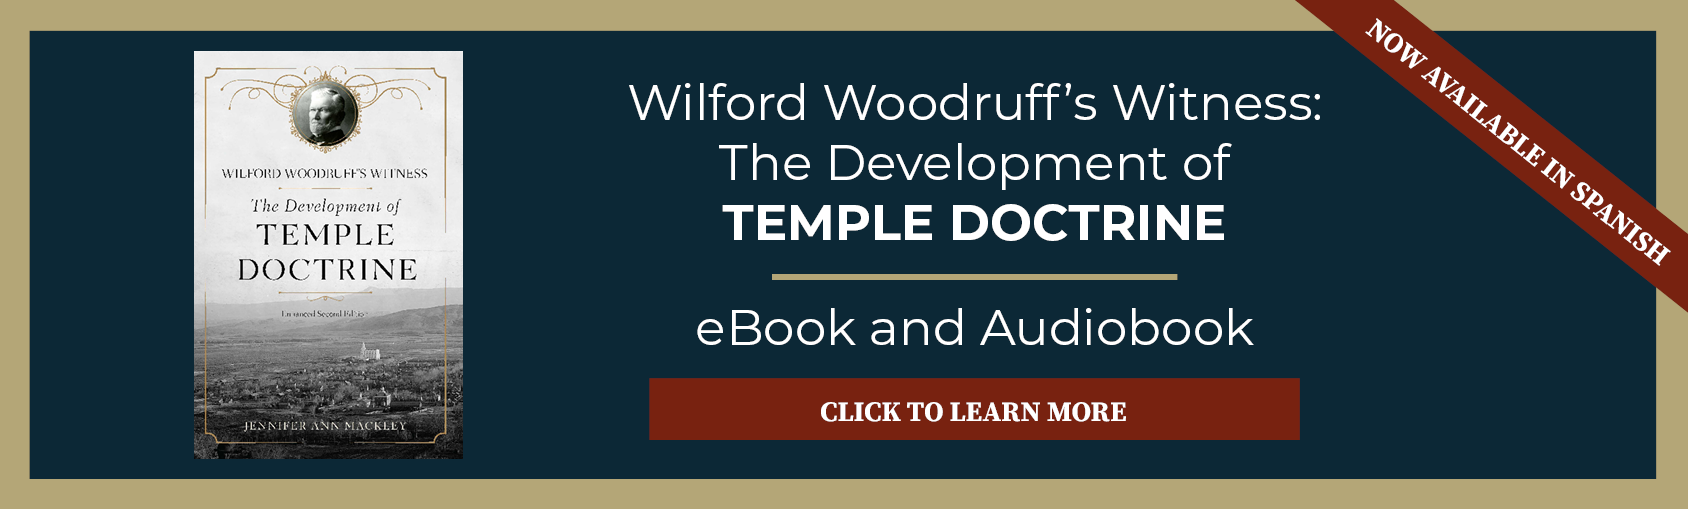 Wilford Woodruff's Witness: The Development of Temple Doctrine 2nd Edition